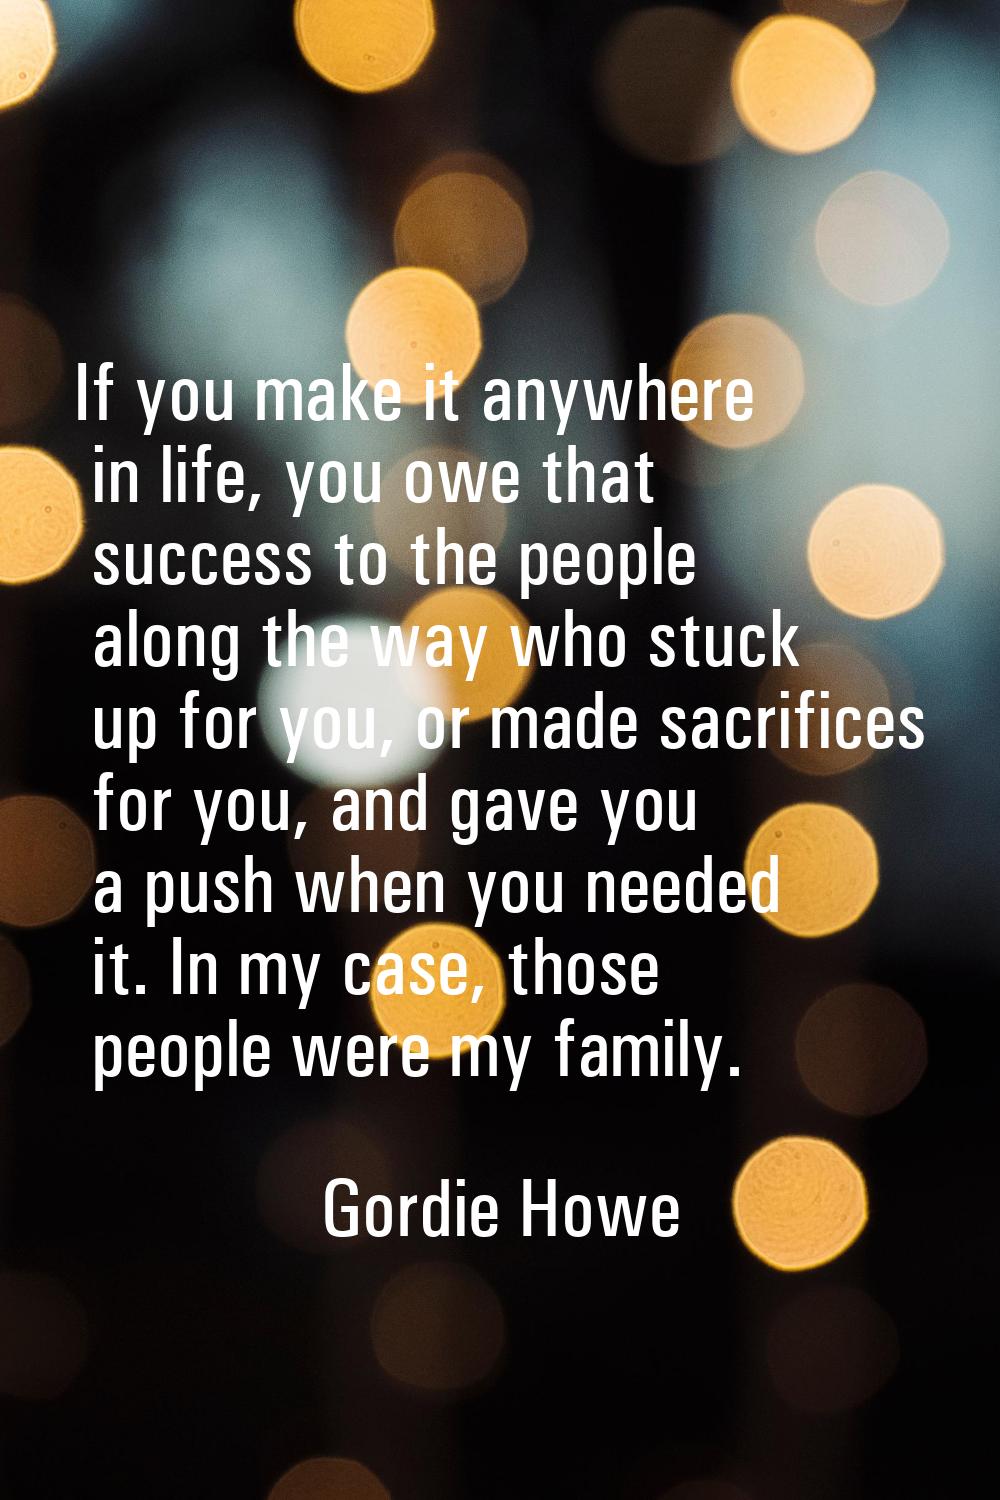 If you make it anywhere in life, you owe that success to the people along the way who stuck up for 